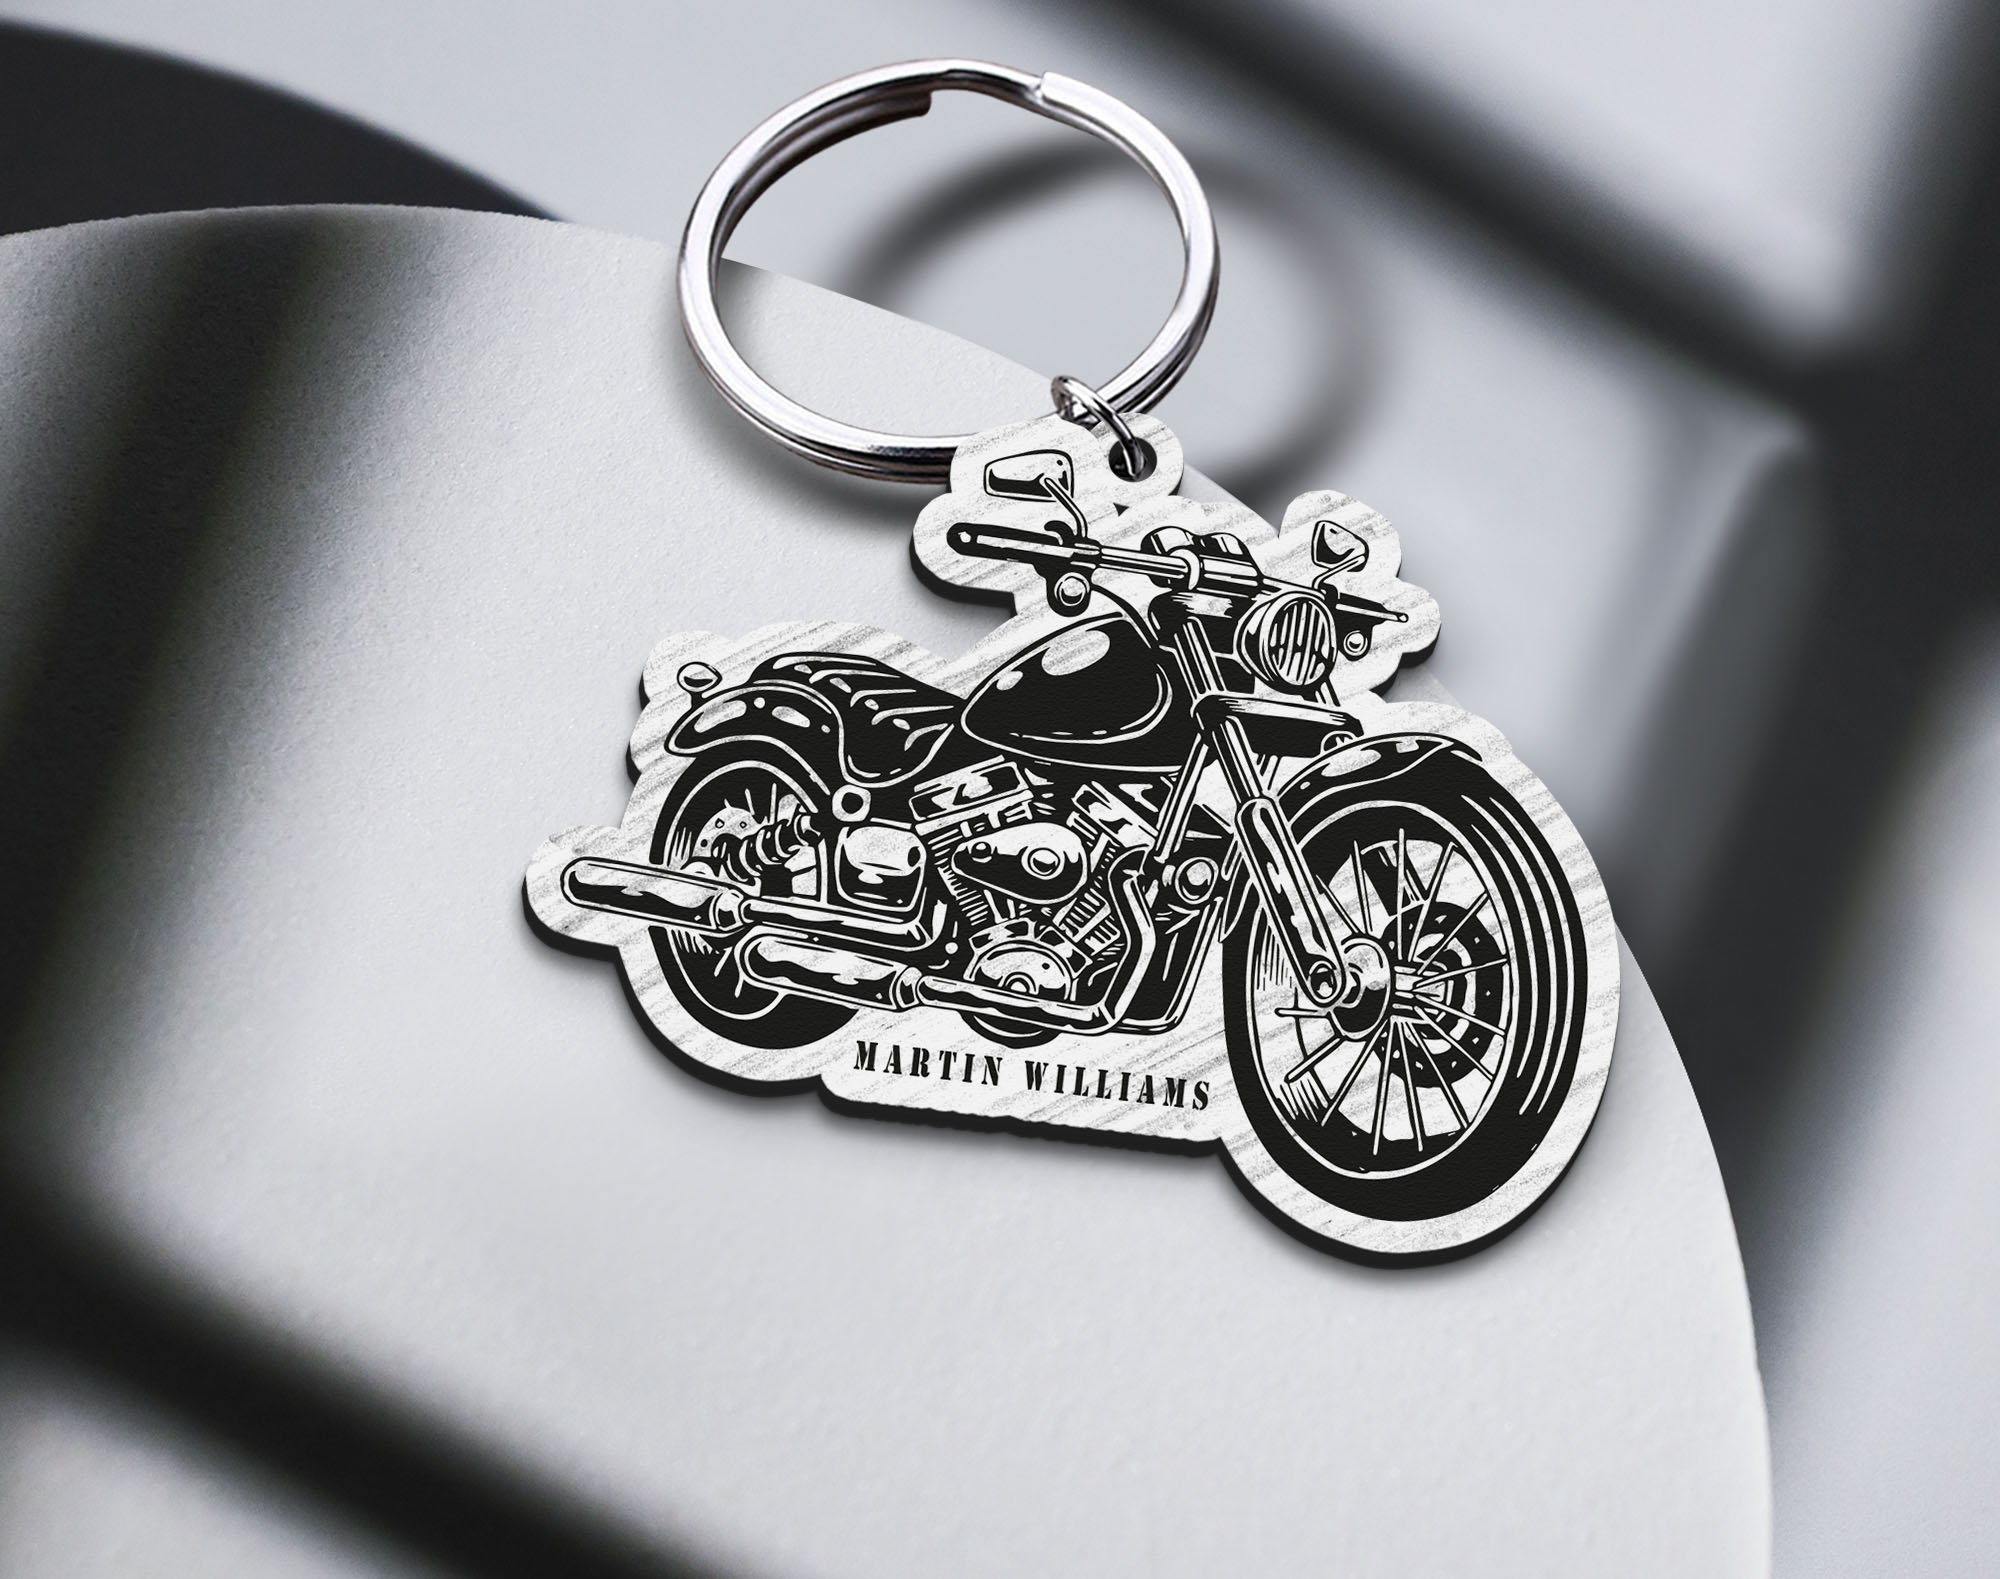 mvcen Personalized Keychain, Custom Key Tag Embroidery Car Key Chain , Customized Motorcycle Keychains for Men Women Boys and Girls